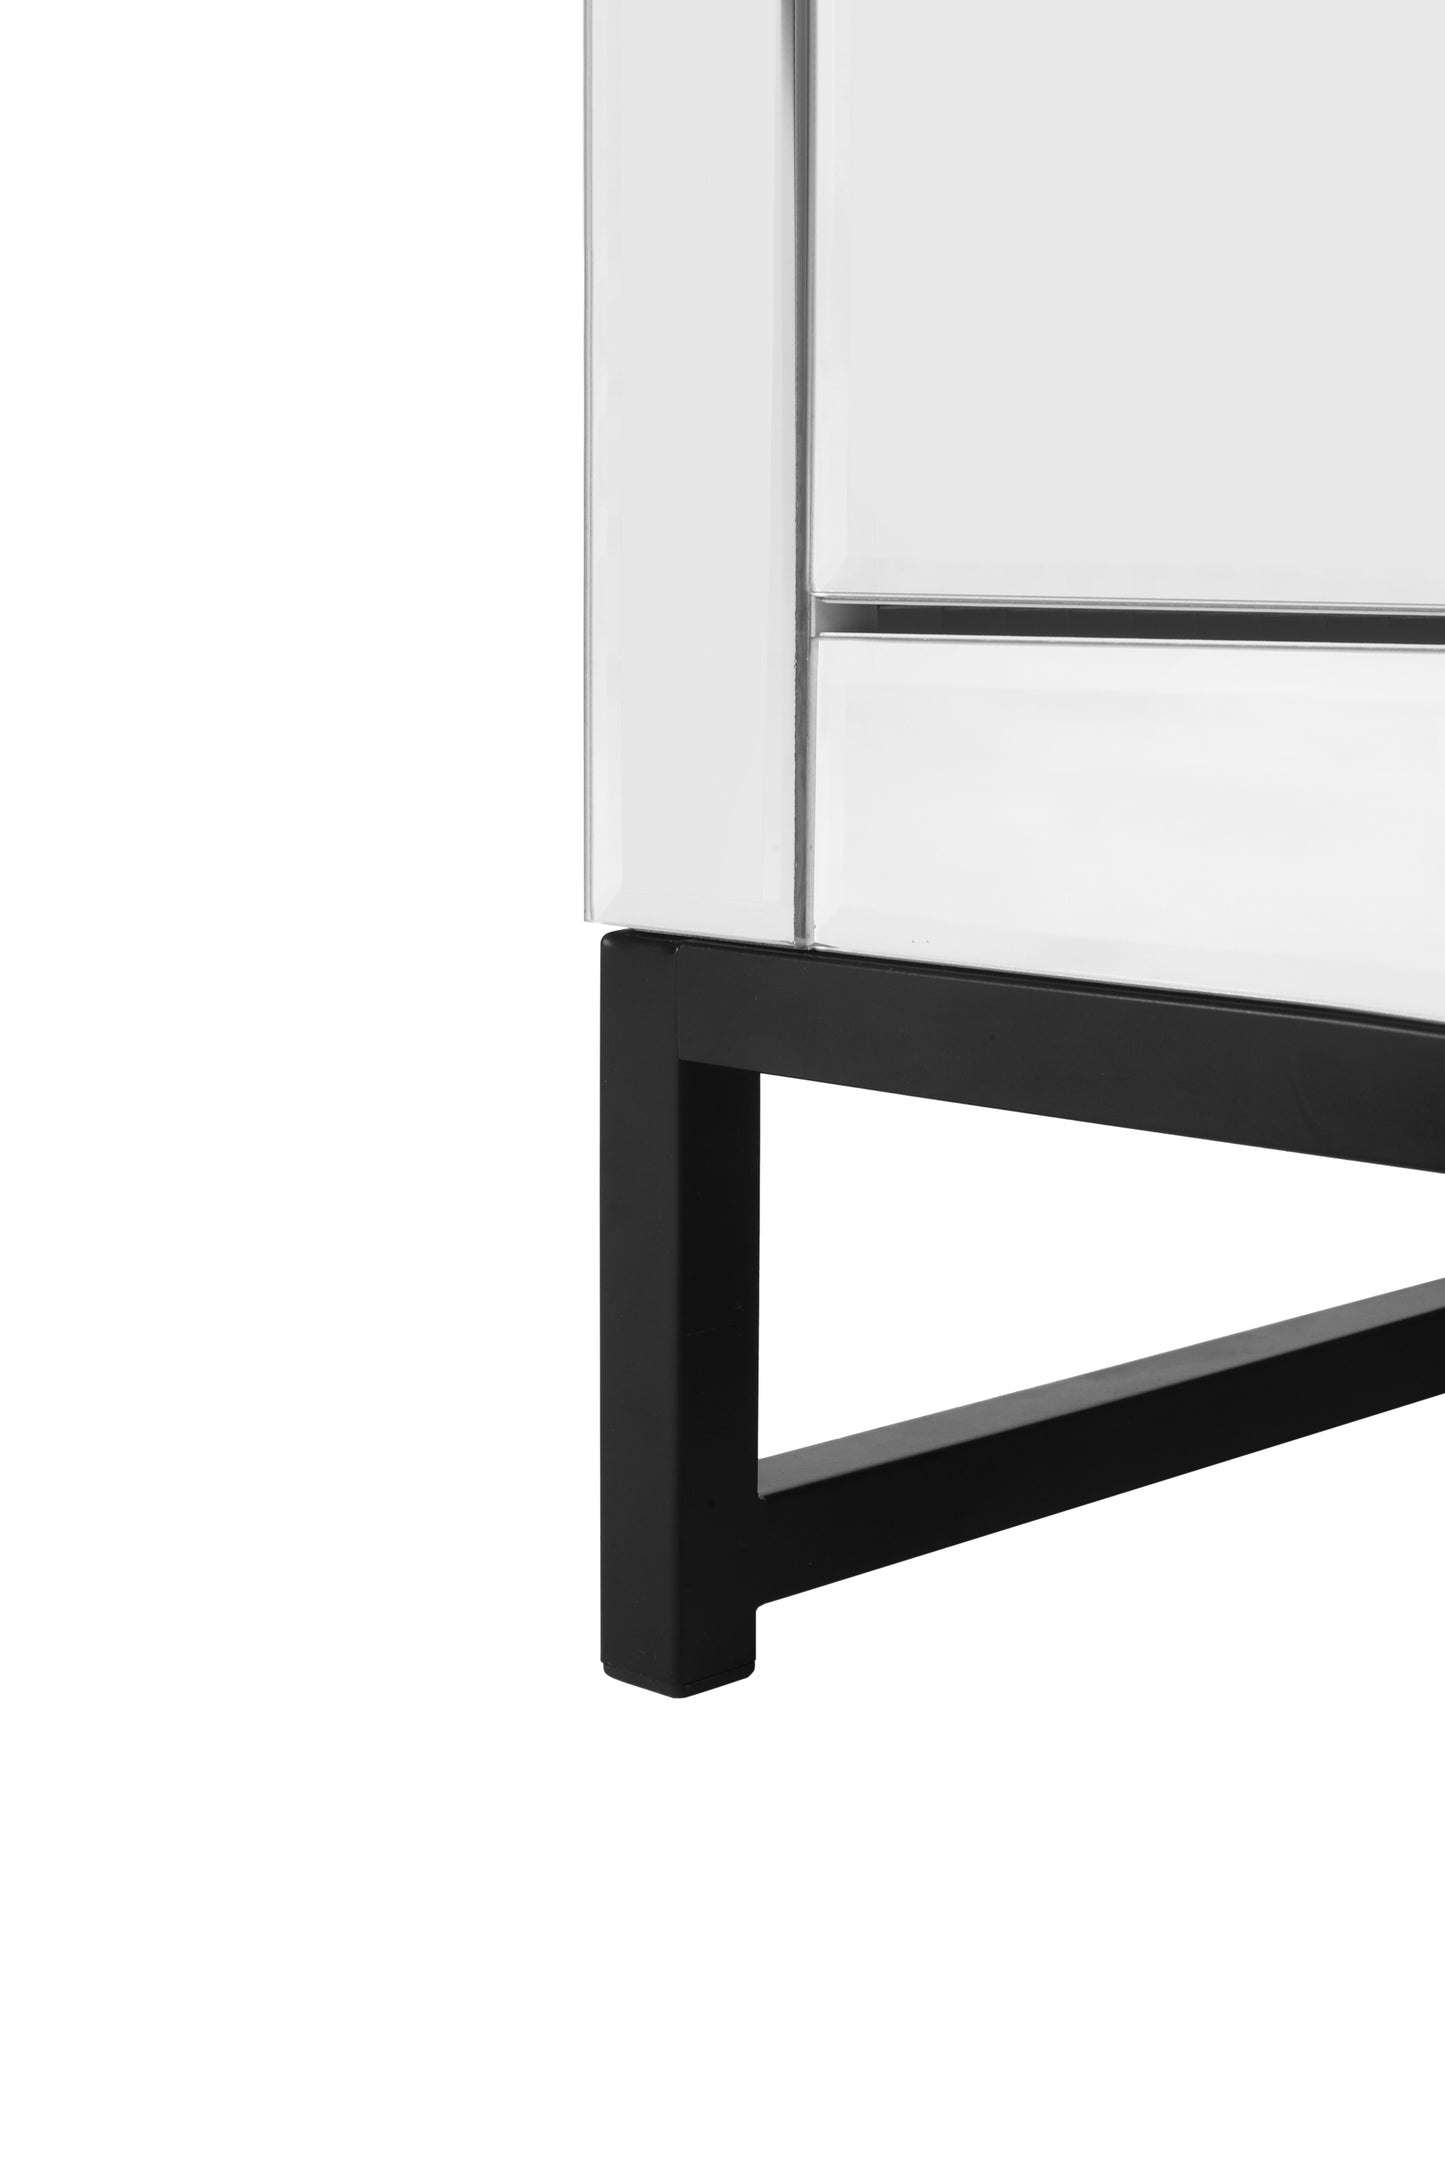 mirrored 2 drawer nightstand,Modern End Table with Drawer, Bedside Table for Bedroom, Living Room